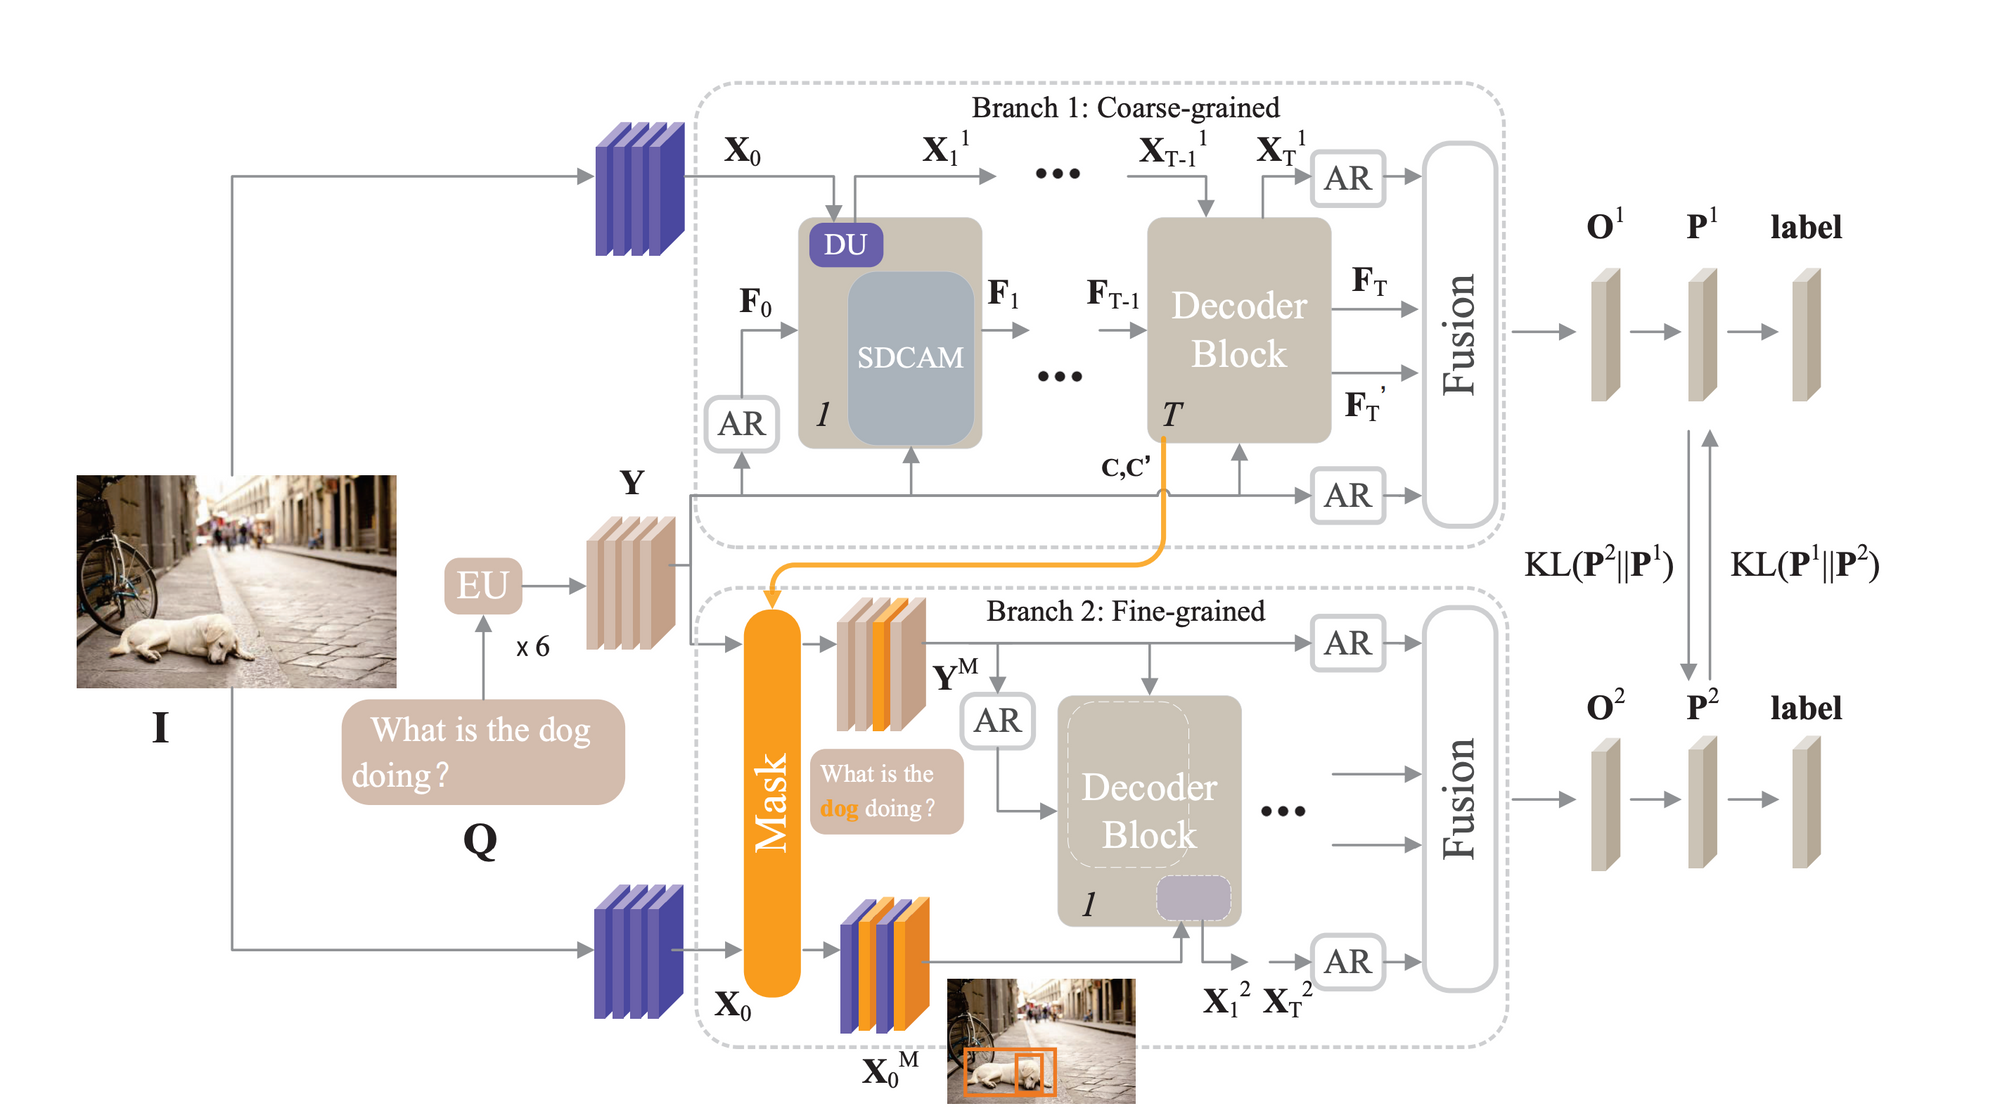 Diagram of a deep learning network with coarse-grained and fine-grained branches, decoders, and fusion blocks labeled